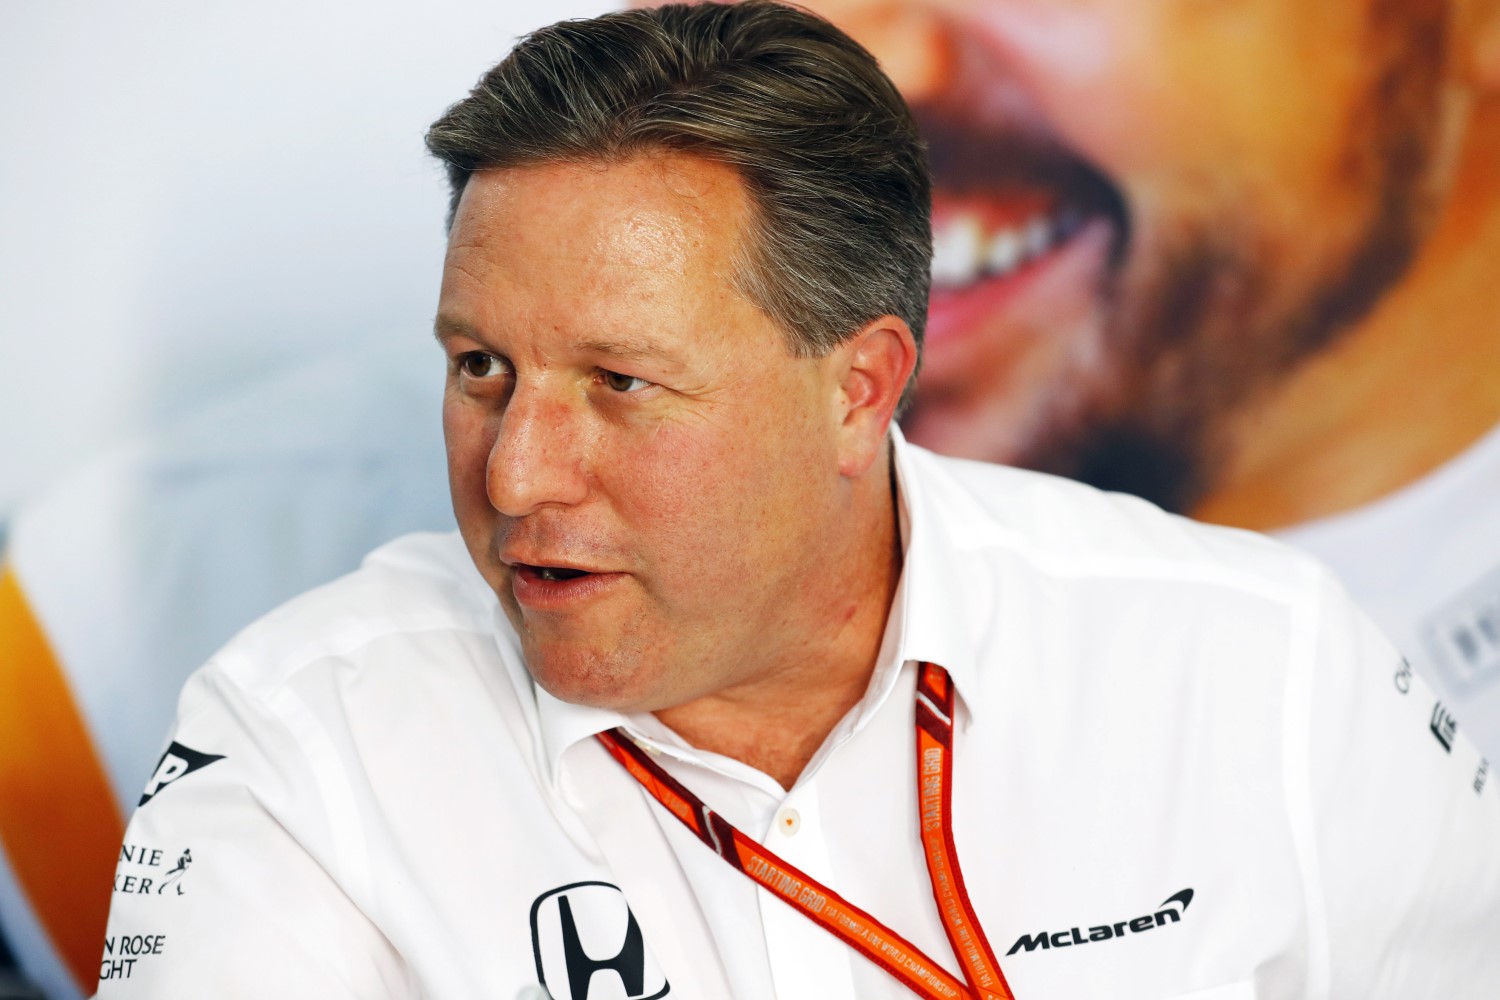 Zak Brown says Renault engine fast so he has no excuse in 2018